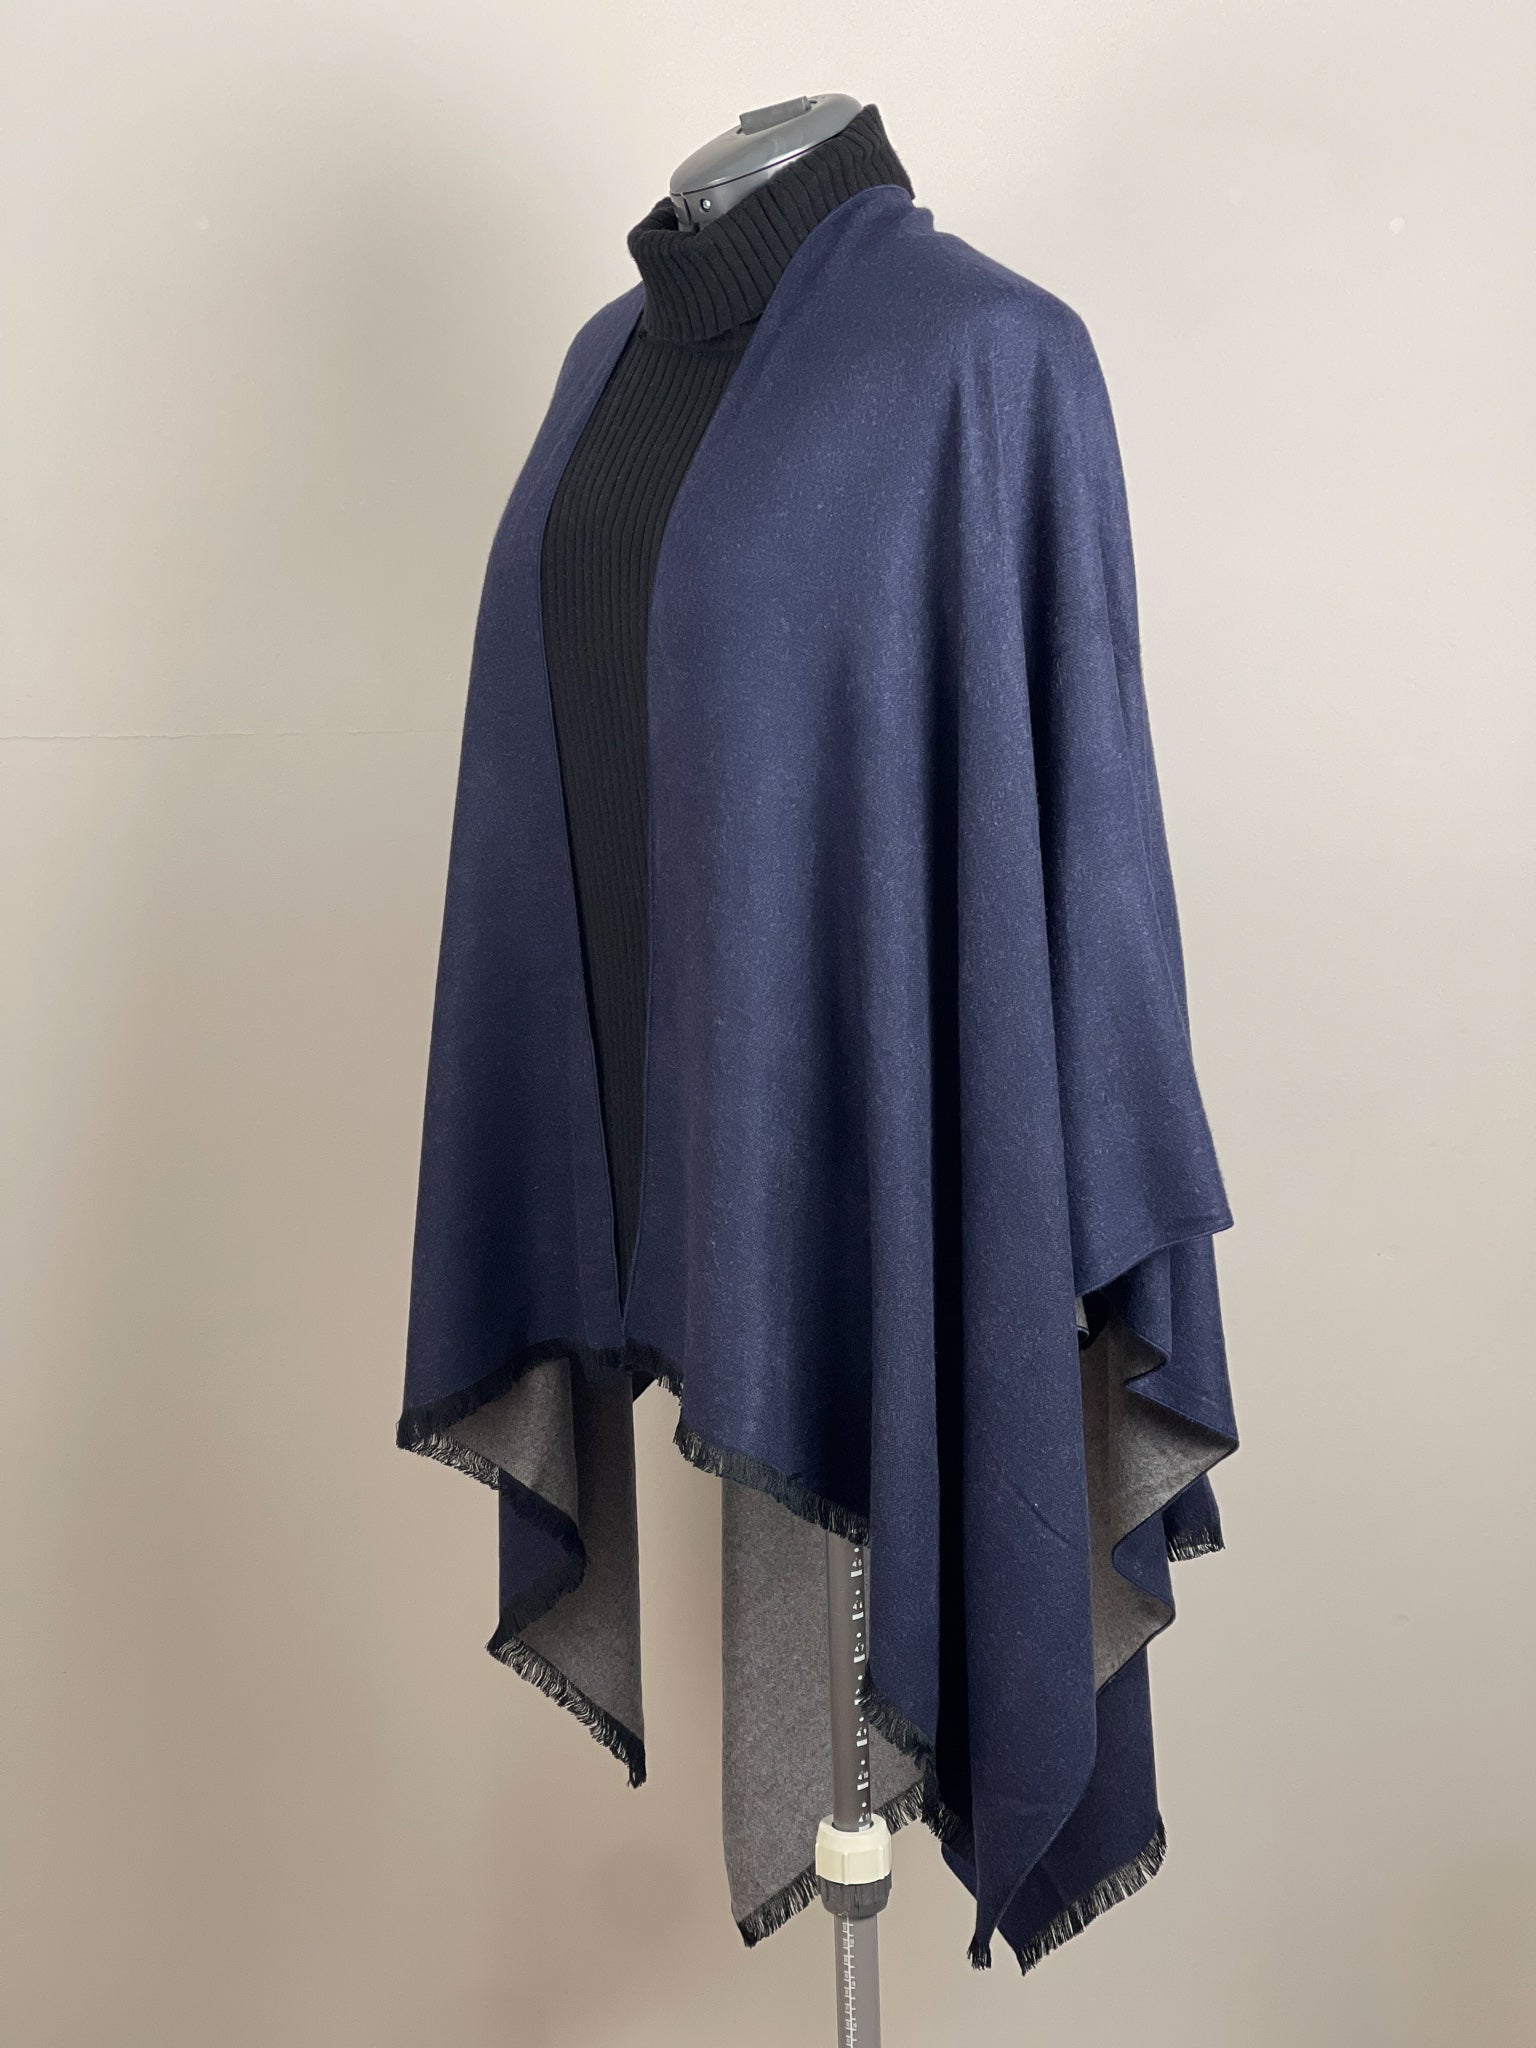 Cashmere Cape. Navy & Gray Reversible